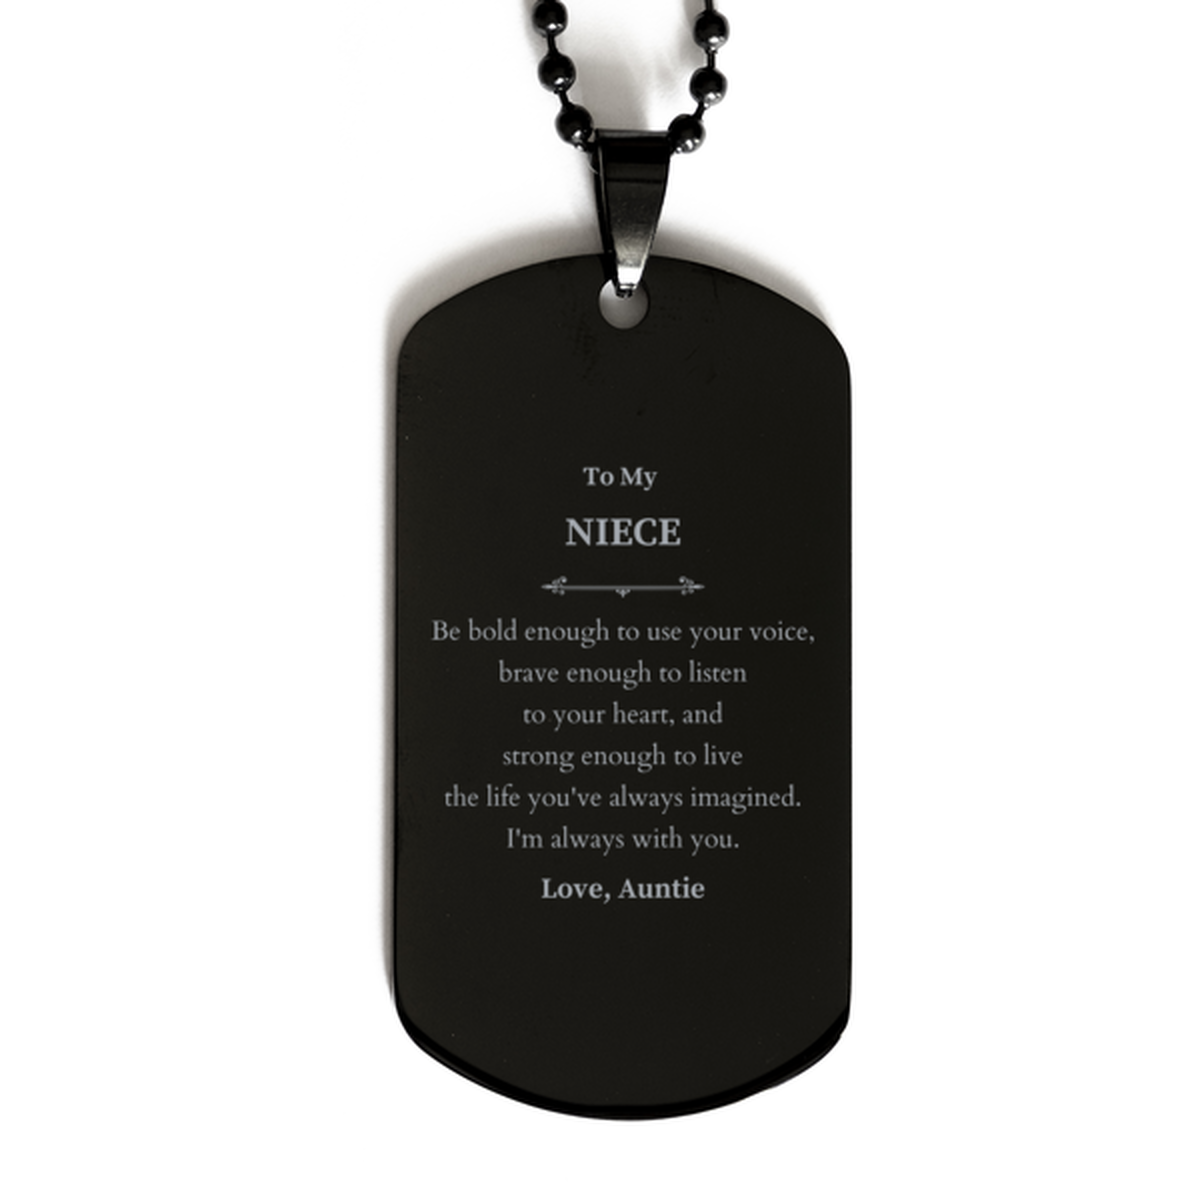 Keepsake Niece Black Dog Tag Gift Idea Graduation Christmas Birthday Niece from Auntie, Niece Be bold enough to use your voice, brave enough to listen to your heart. Love, Auntie